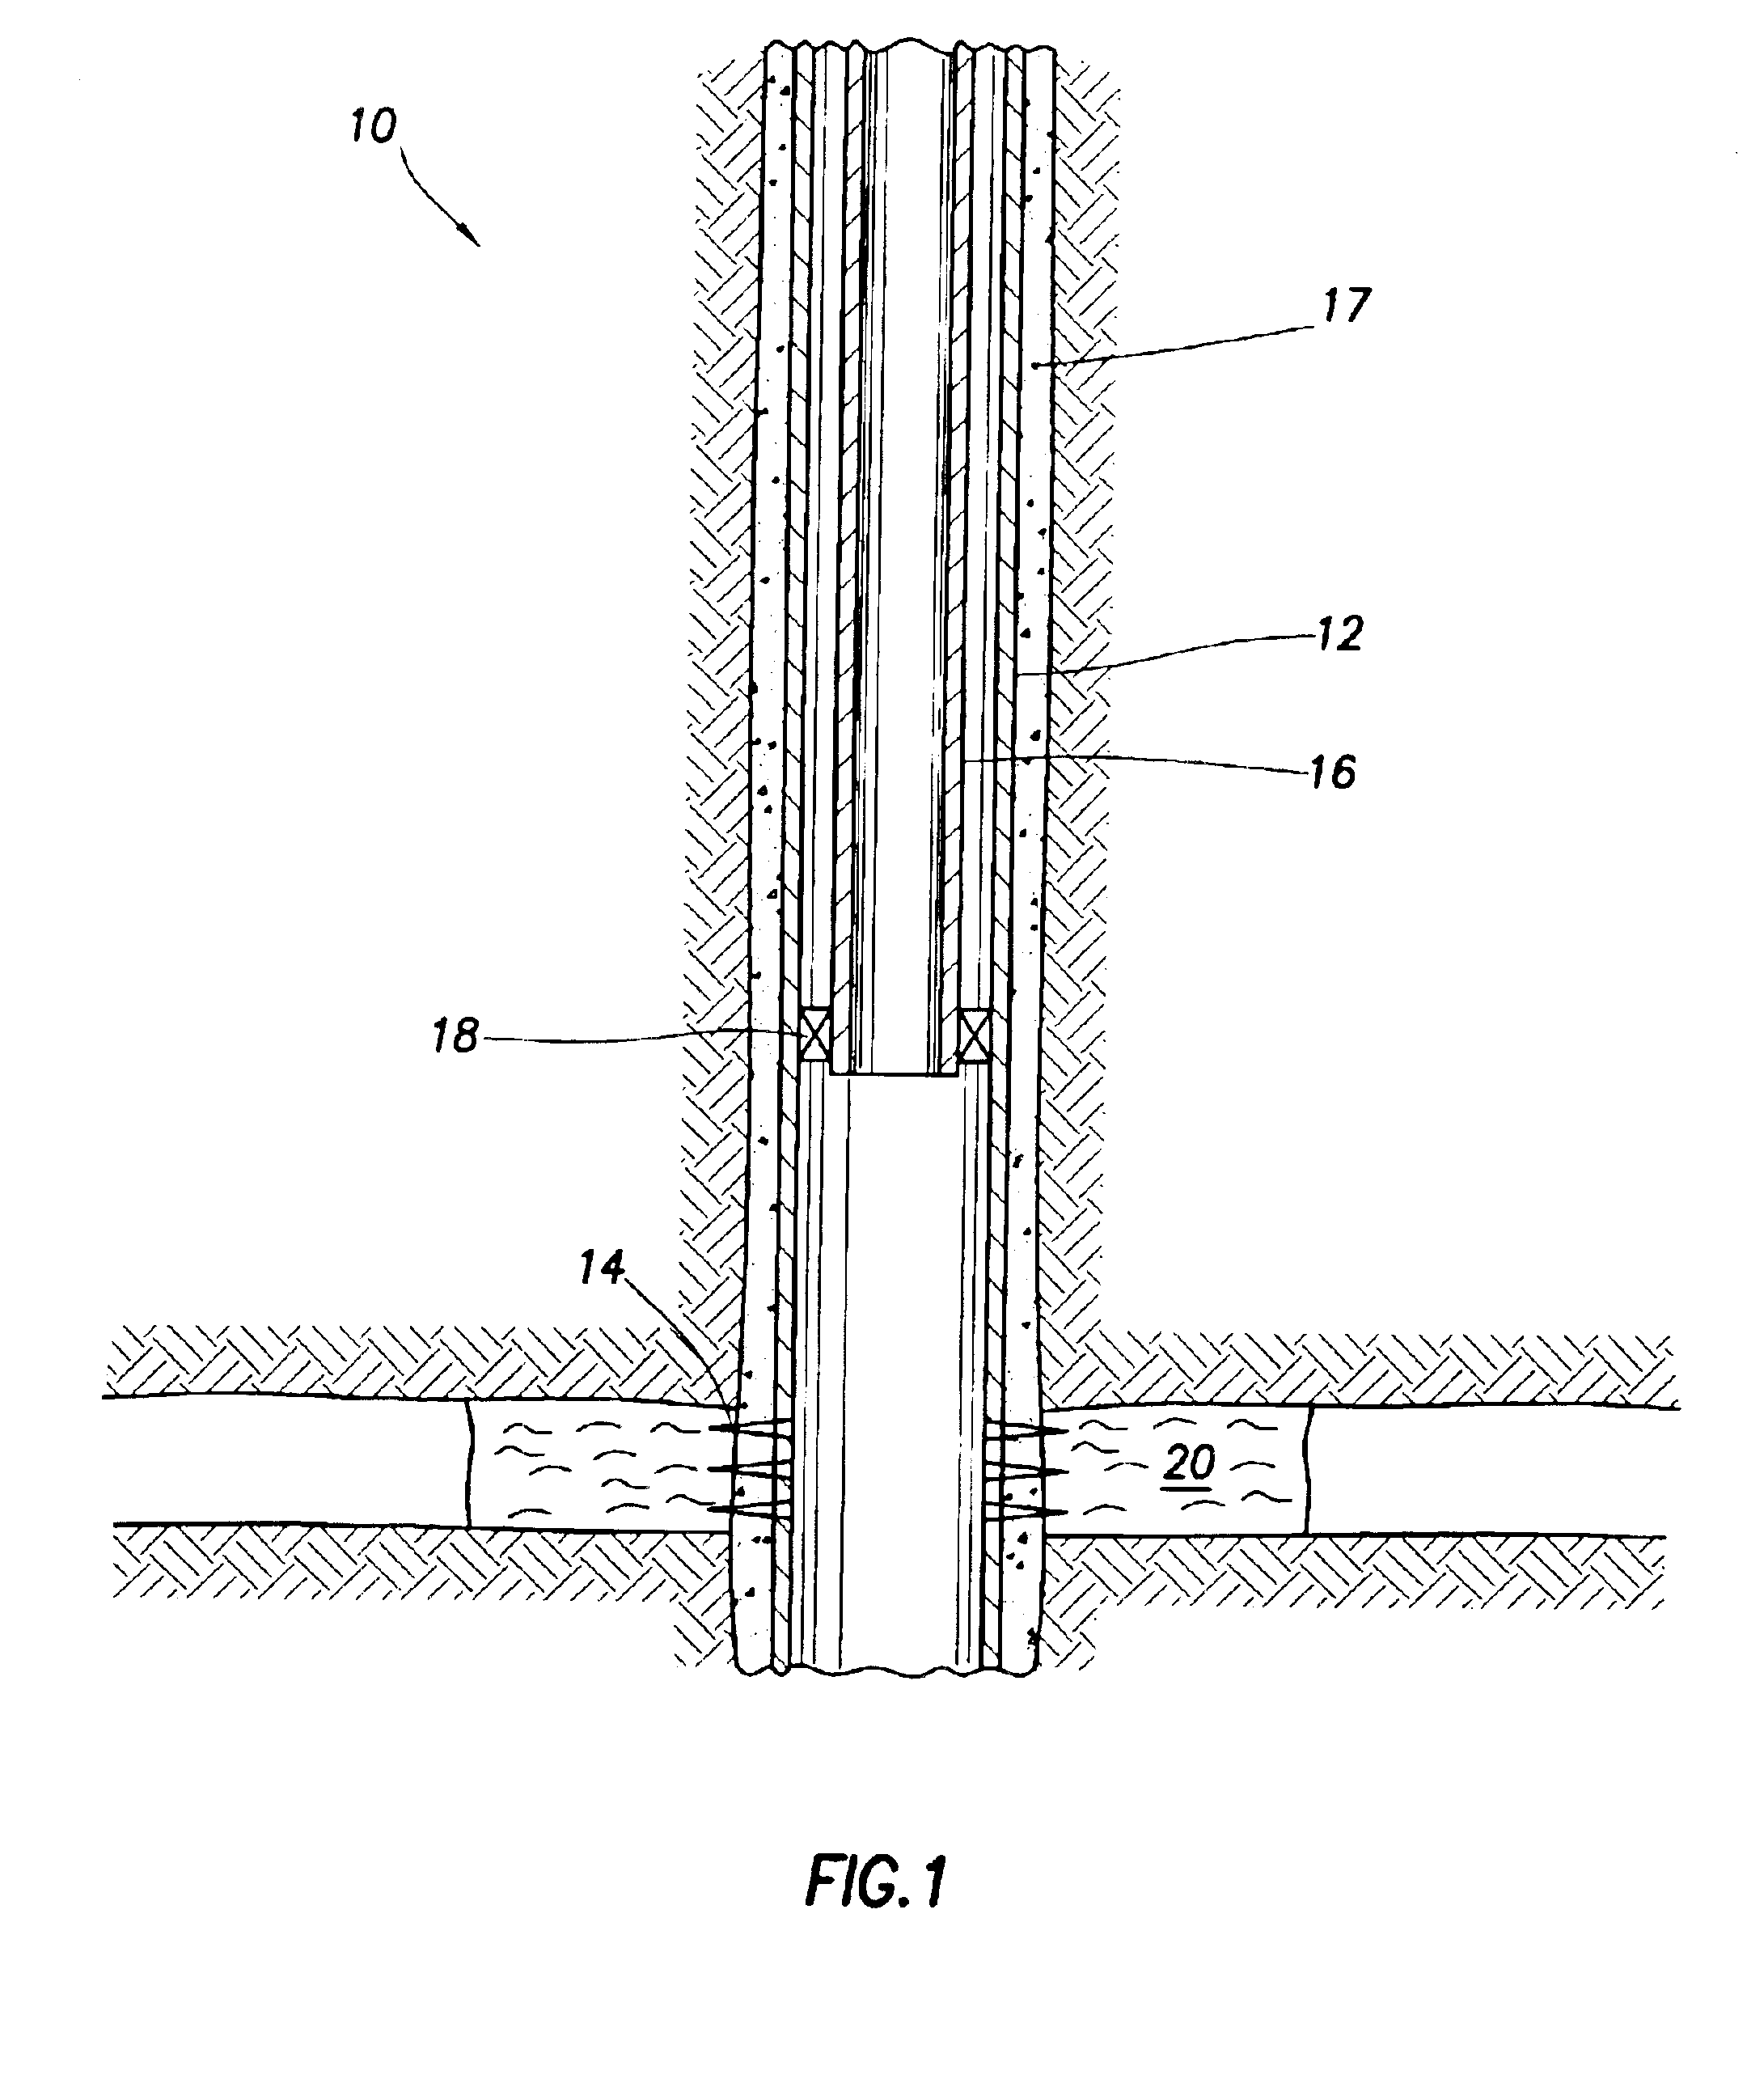 Method for reducing permeability restriction near wellbore